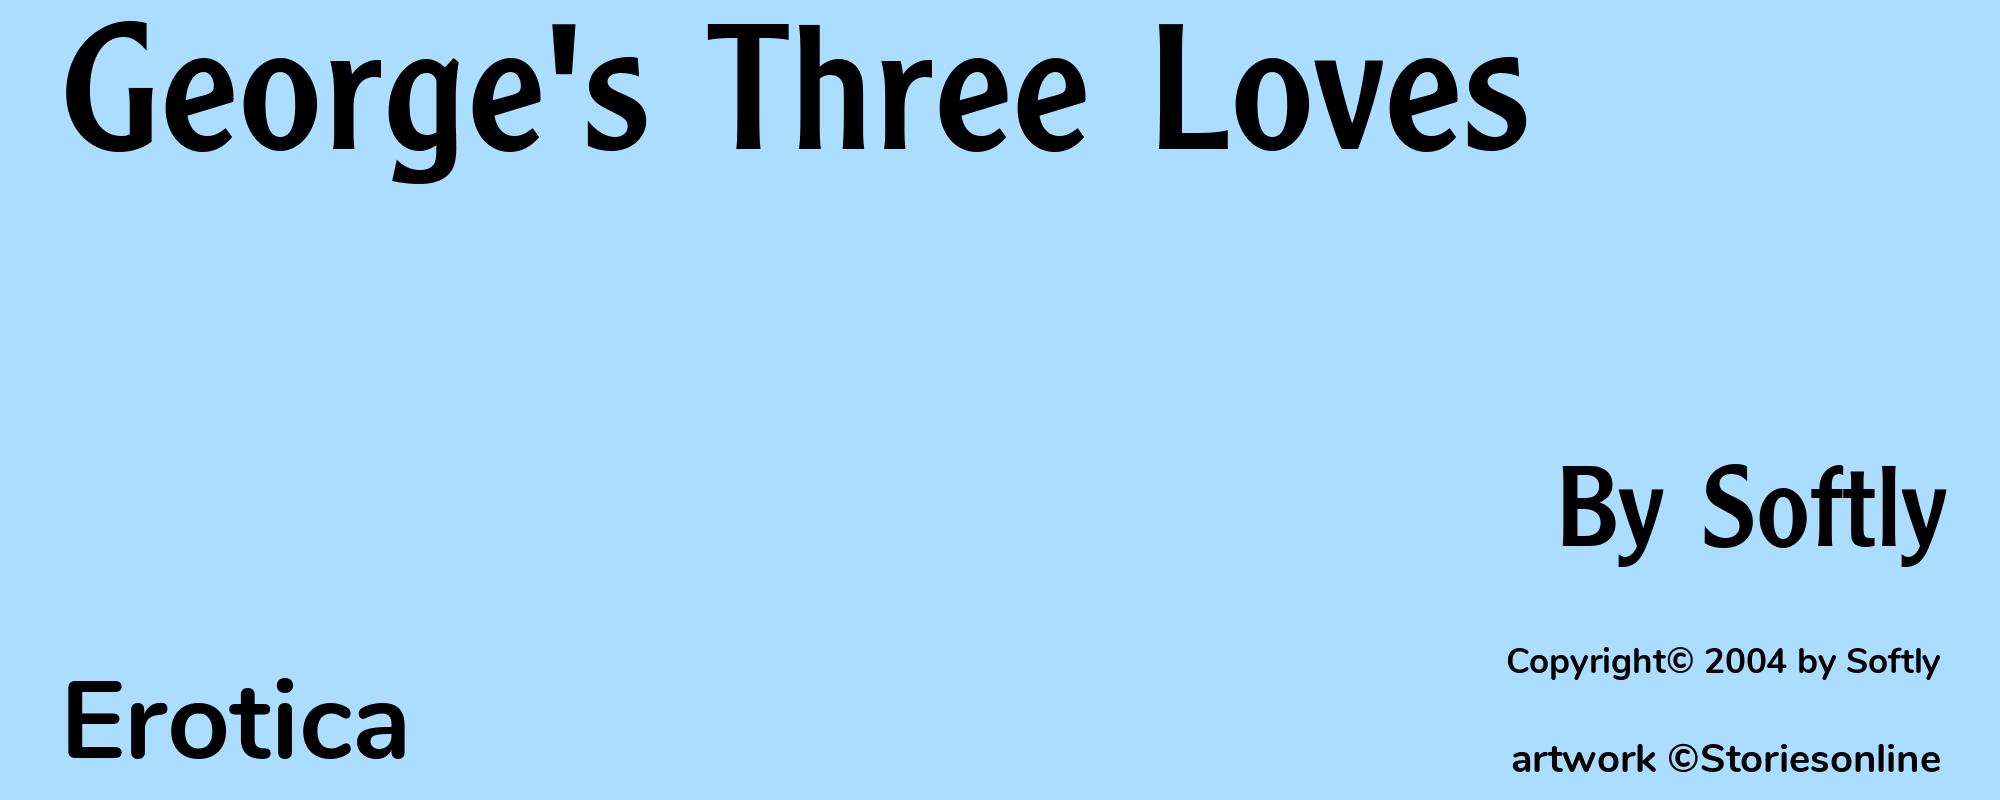 George's Three Loves - Cover